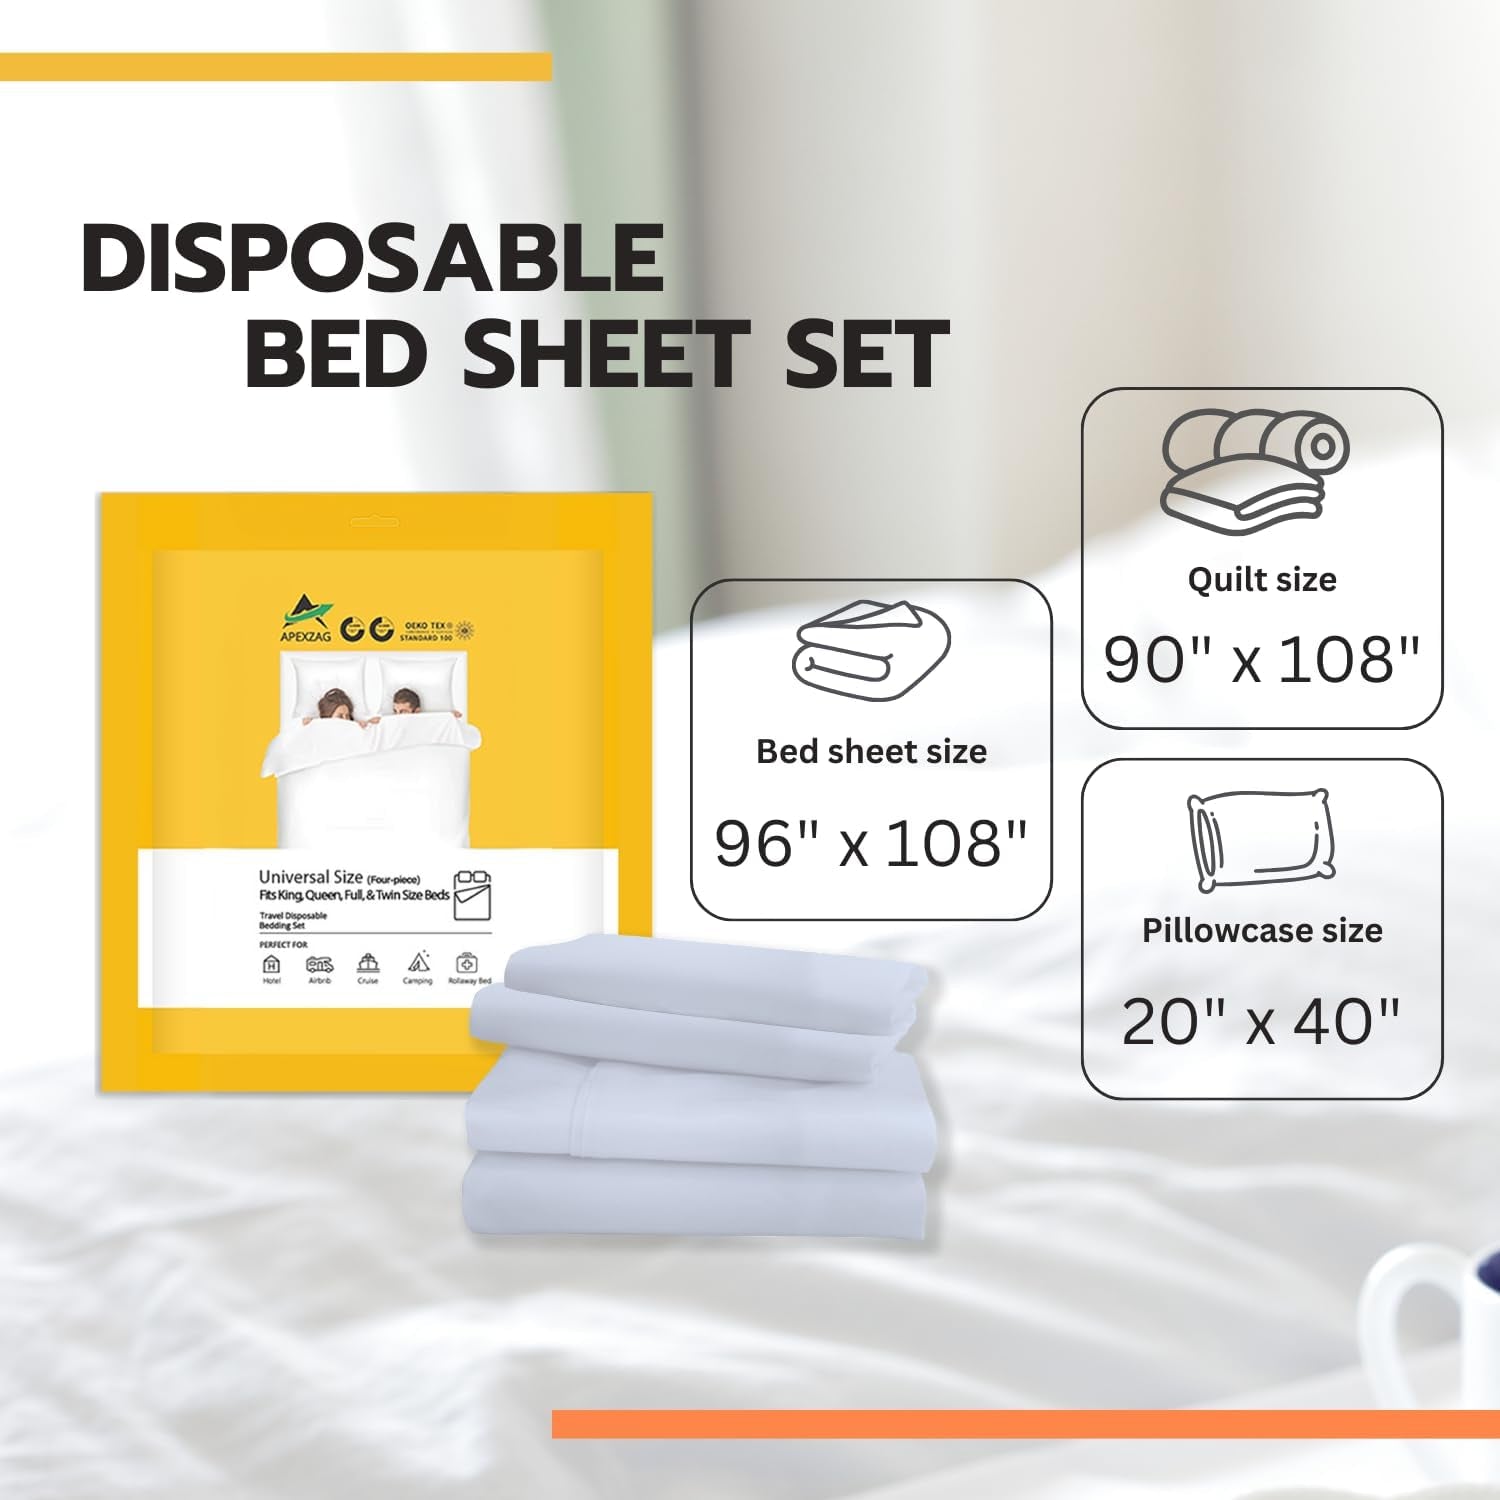 2 Pack Disposable Bed Sheets | Universal Size | Pillowcase and Quilt Cover Set for Travel, Hotel, Camping, Hospital and Home Use - Soft and Durable Non-Woven Fabric